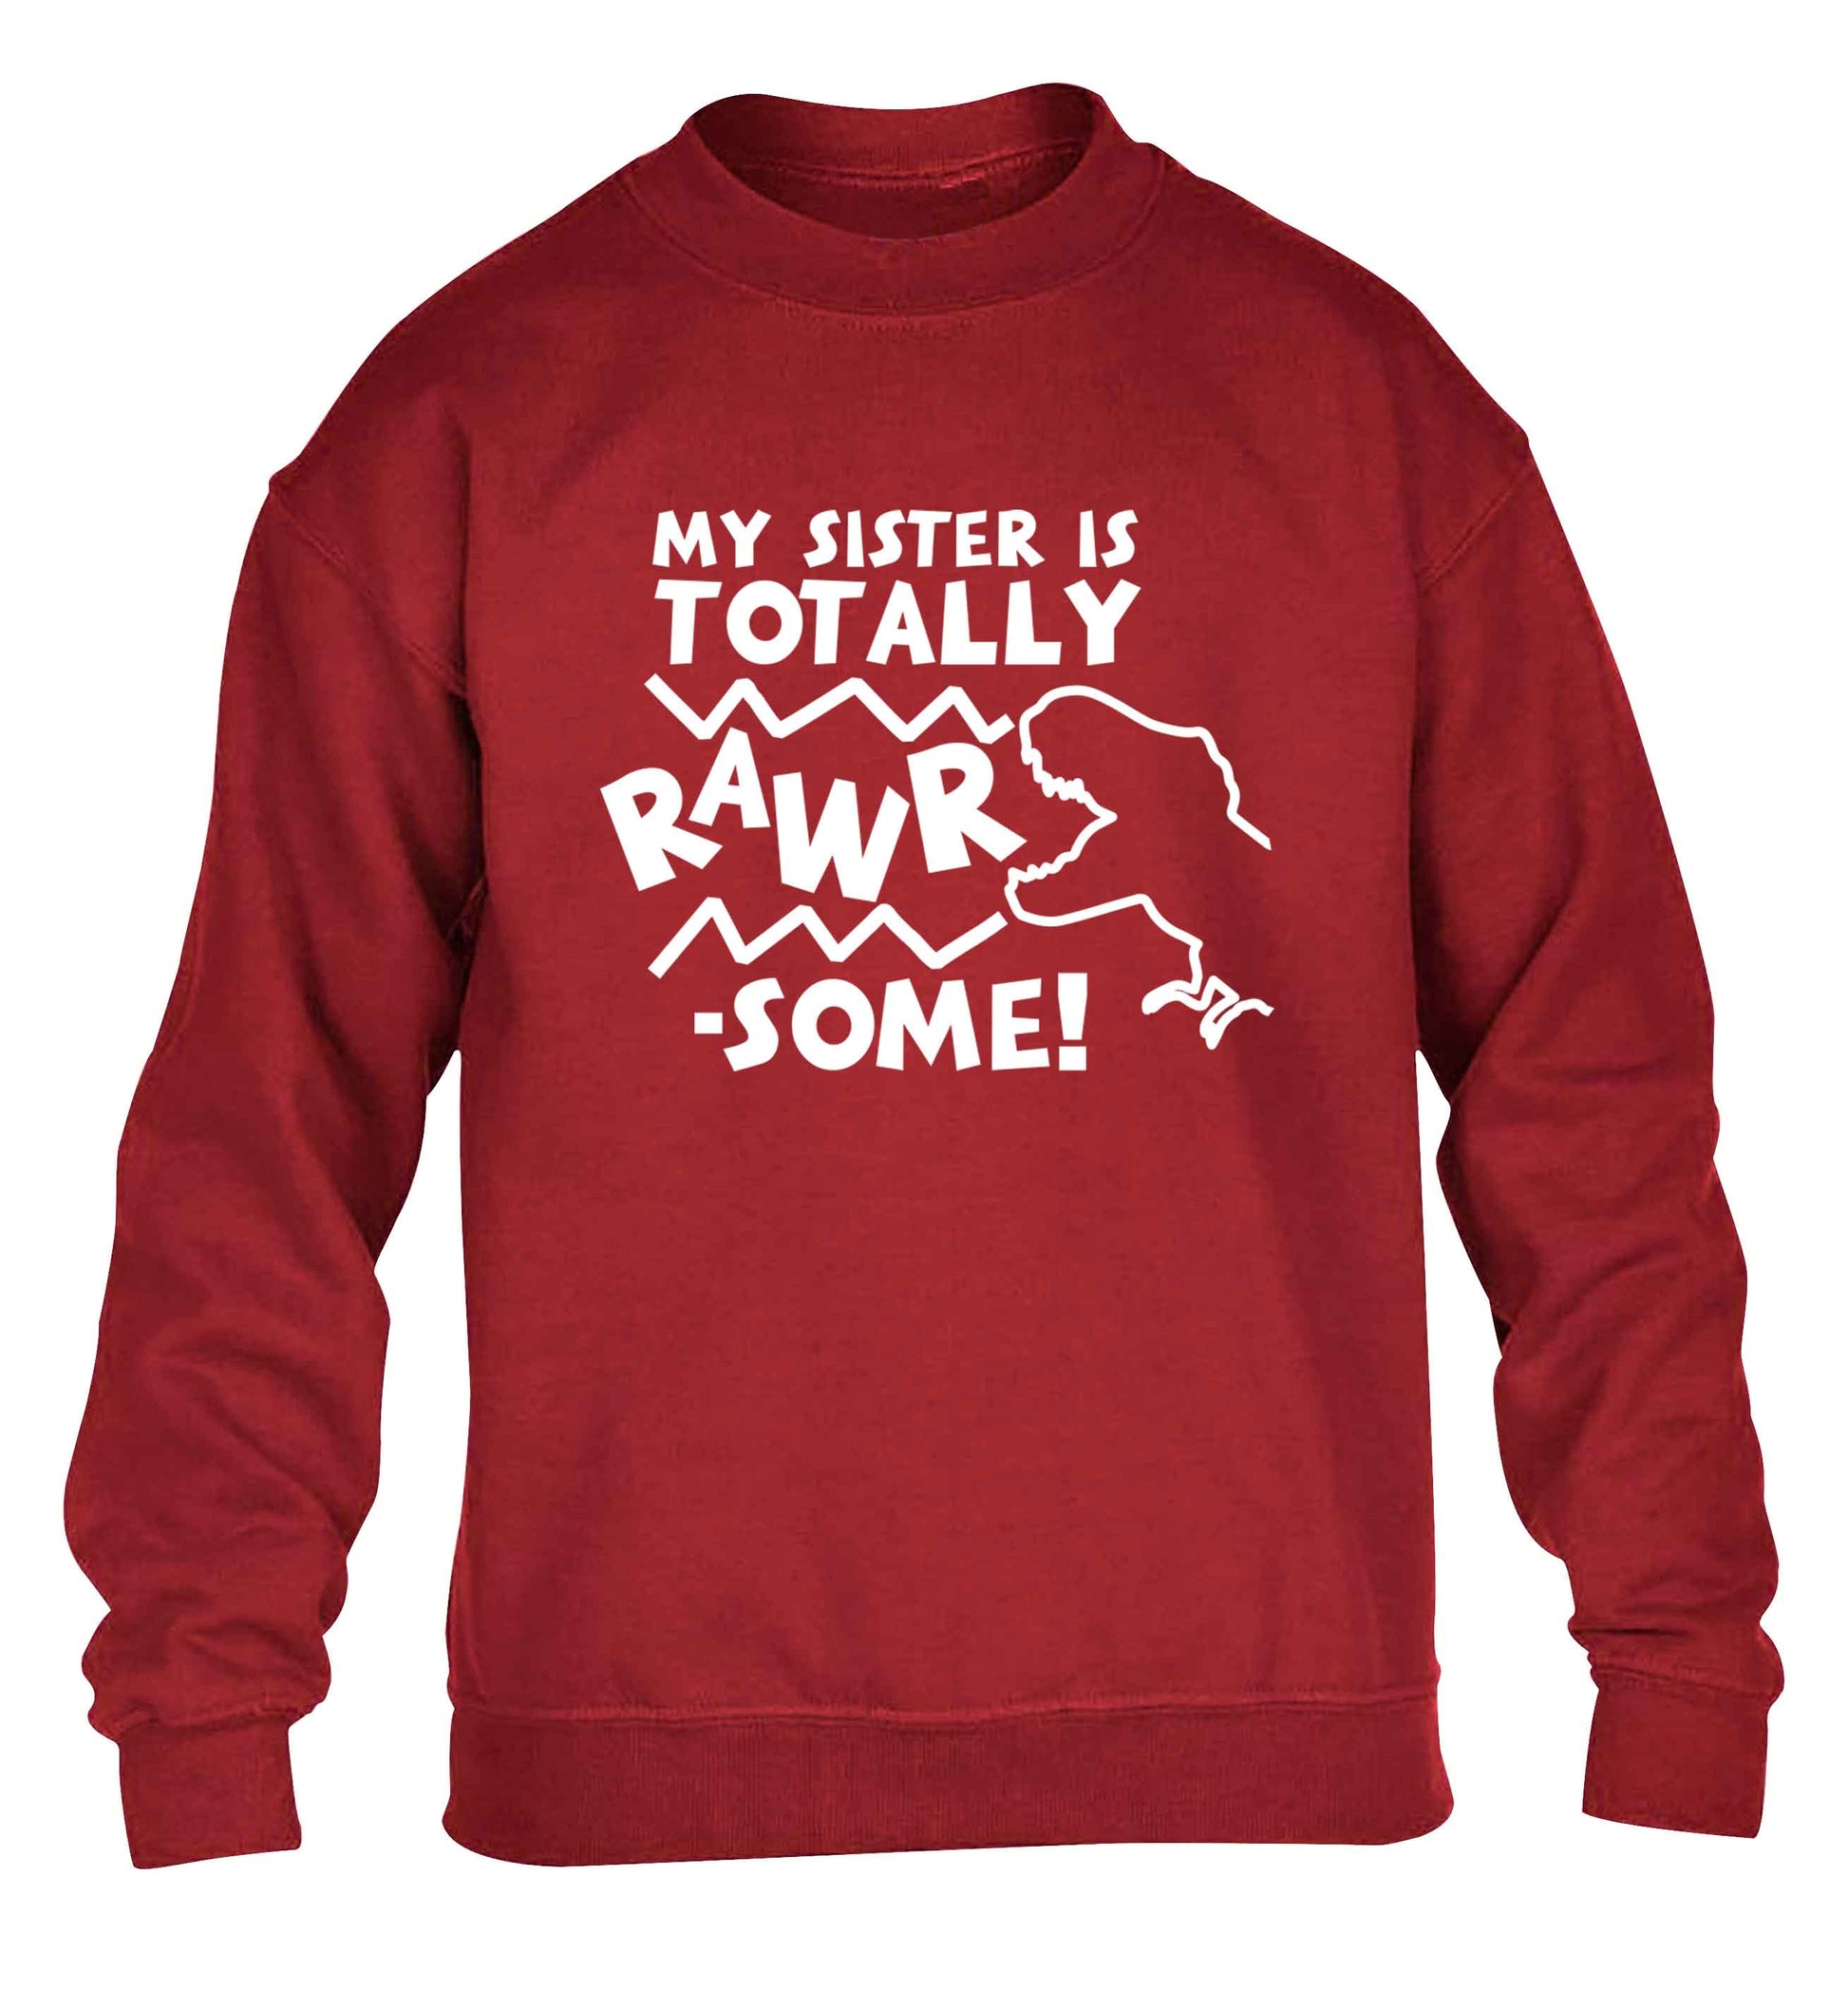 My sister is totally rawrsome children's grey sweater 12-13 Years